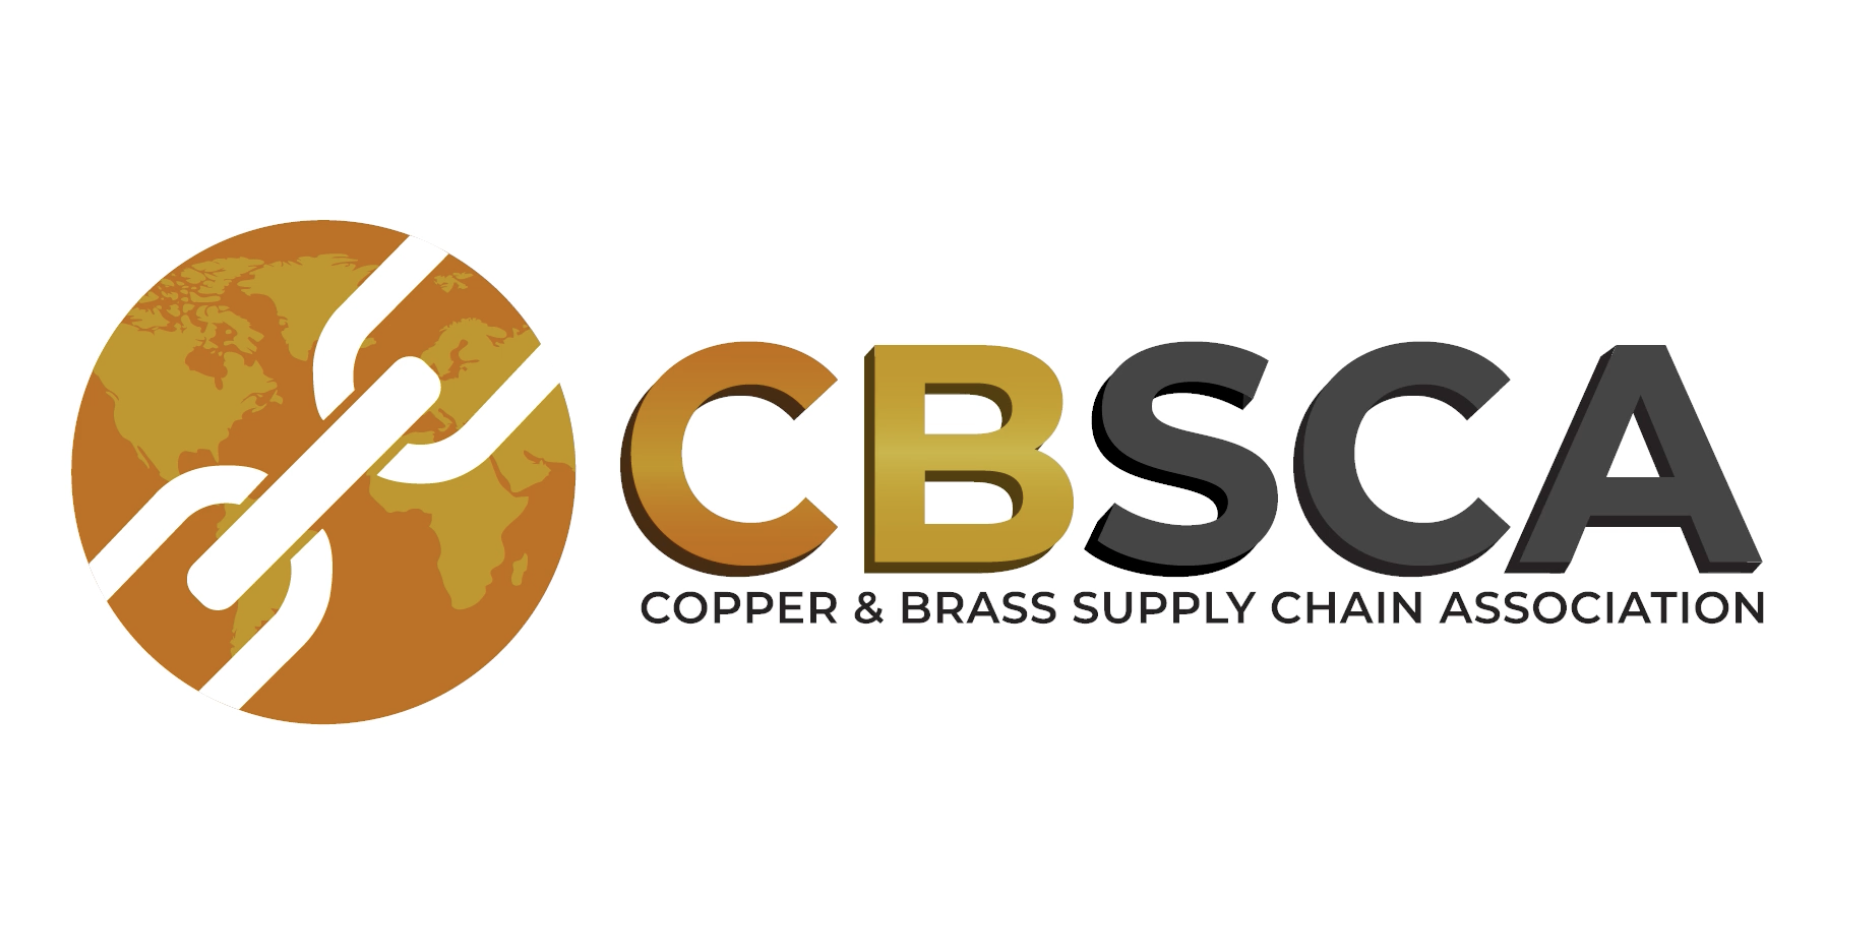 Copper and Brass Supply Chain Association